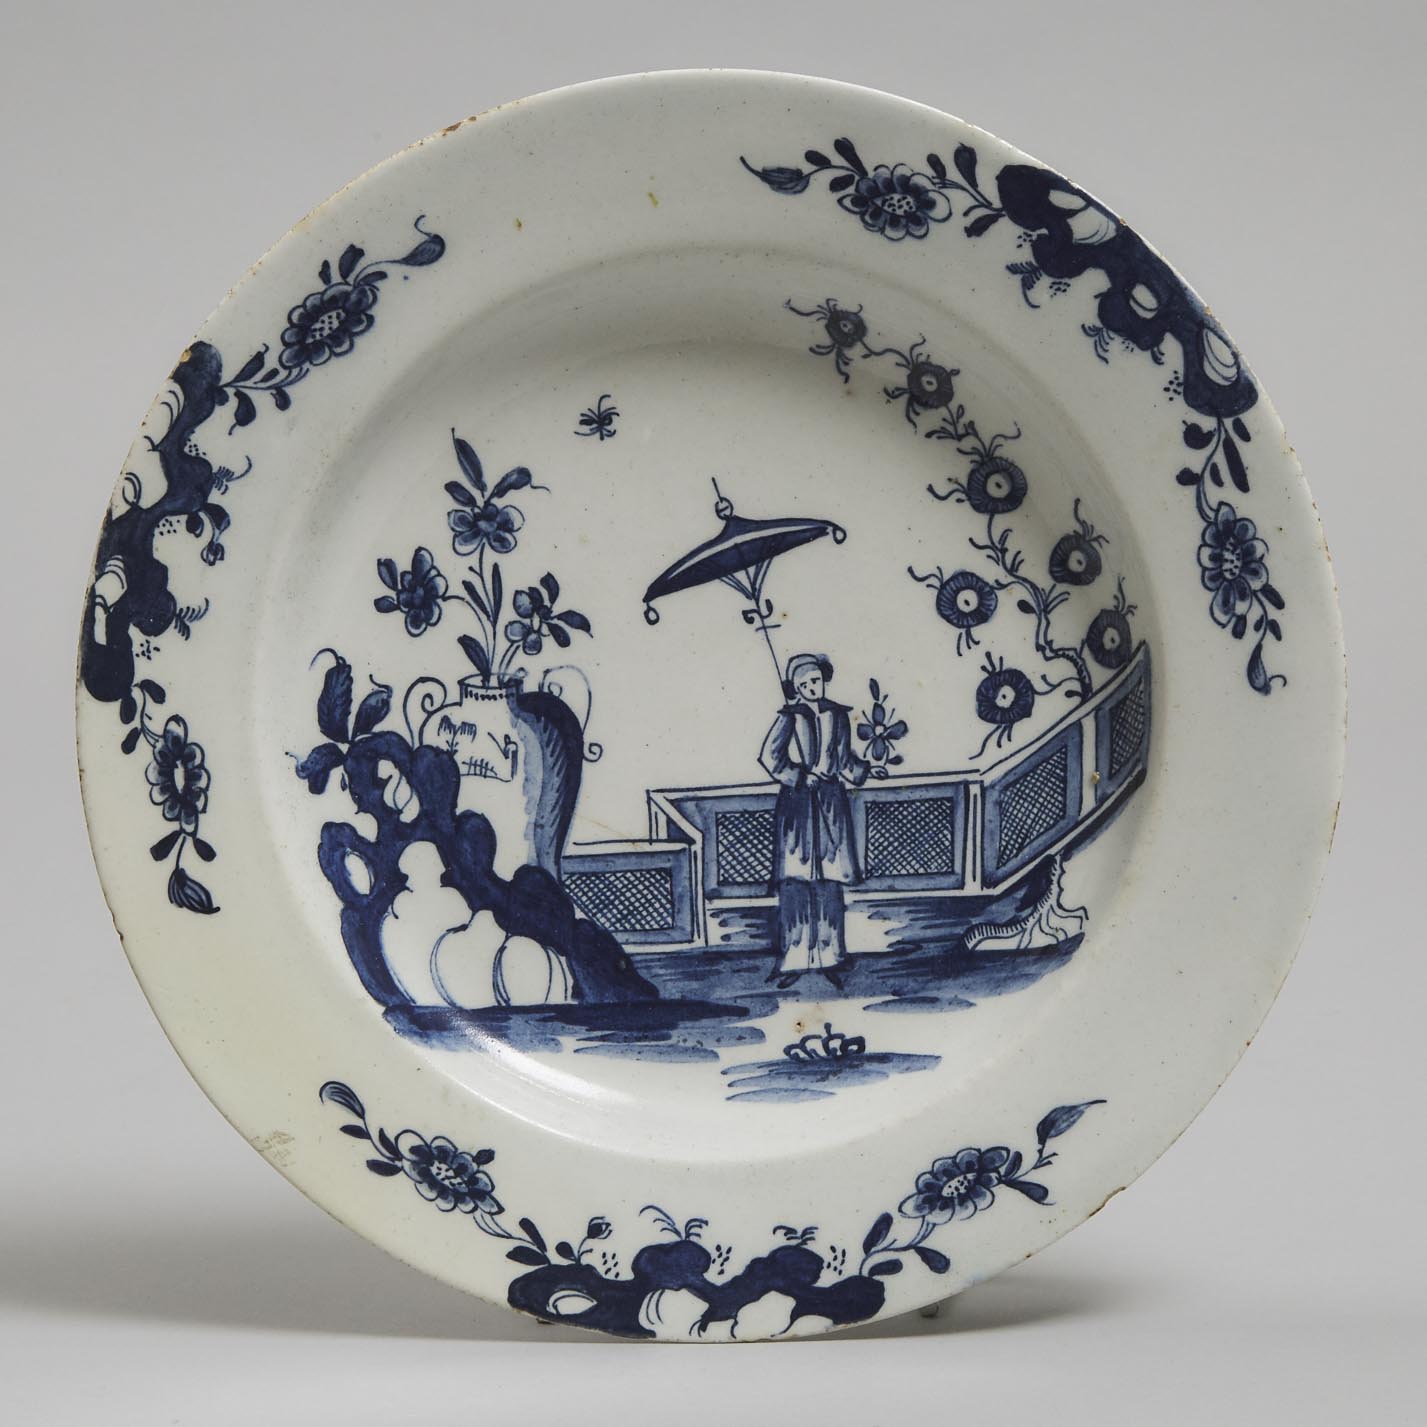 Lowestoft Blue Painted Chinoiserie Plate, c.1775